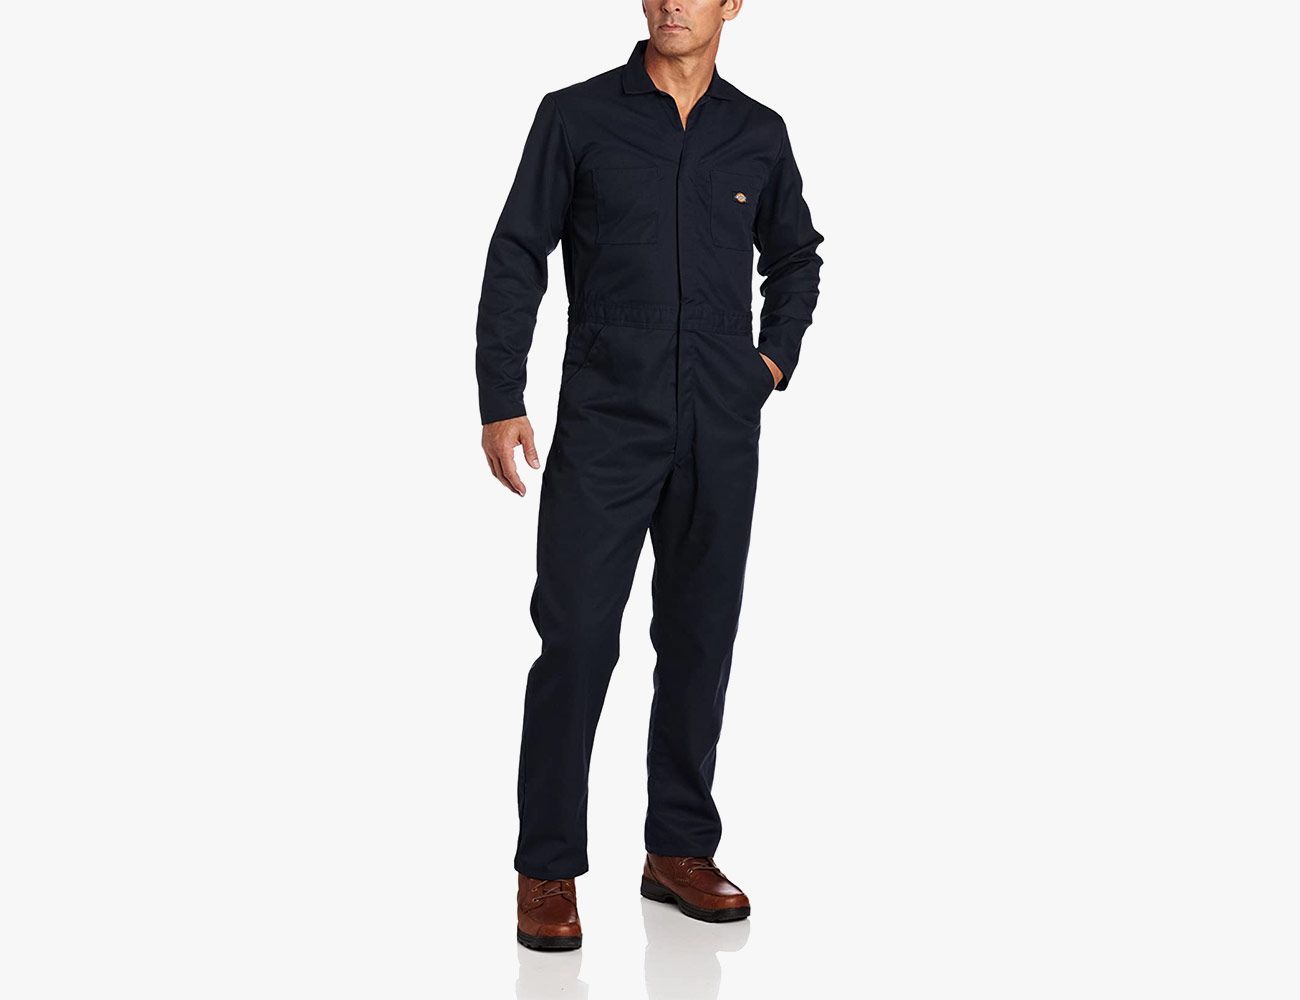 WLD1043COVB Pioner Weldmaster Anti-Static PPE Workwear Boilersuit Coverall 